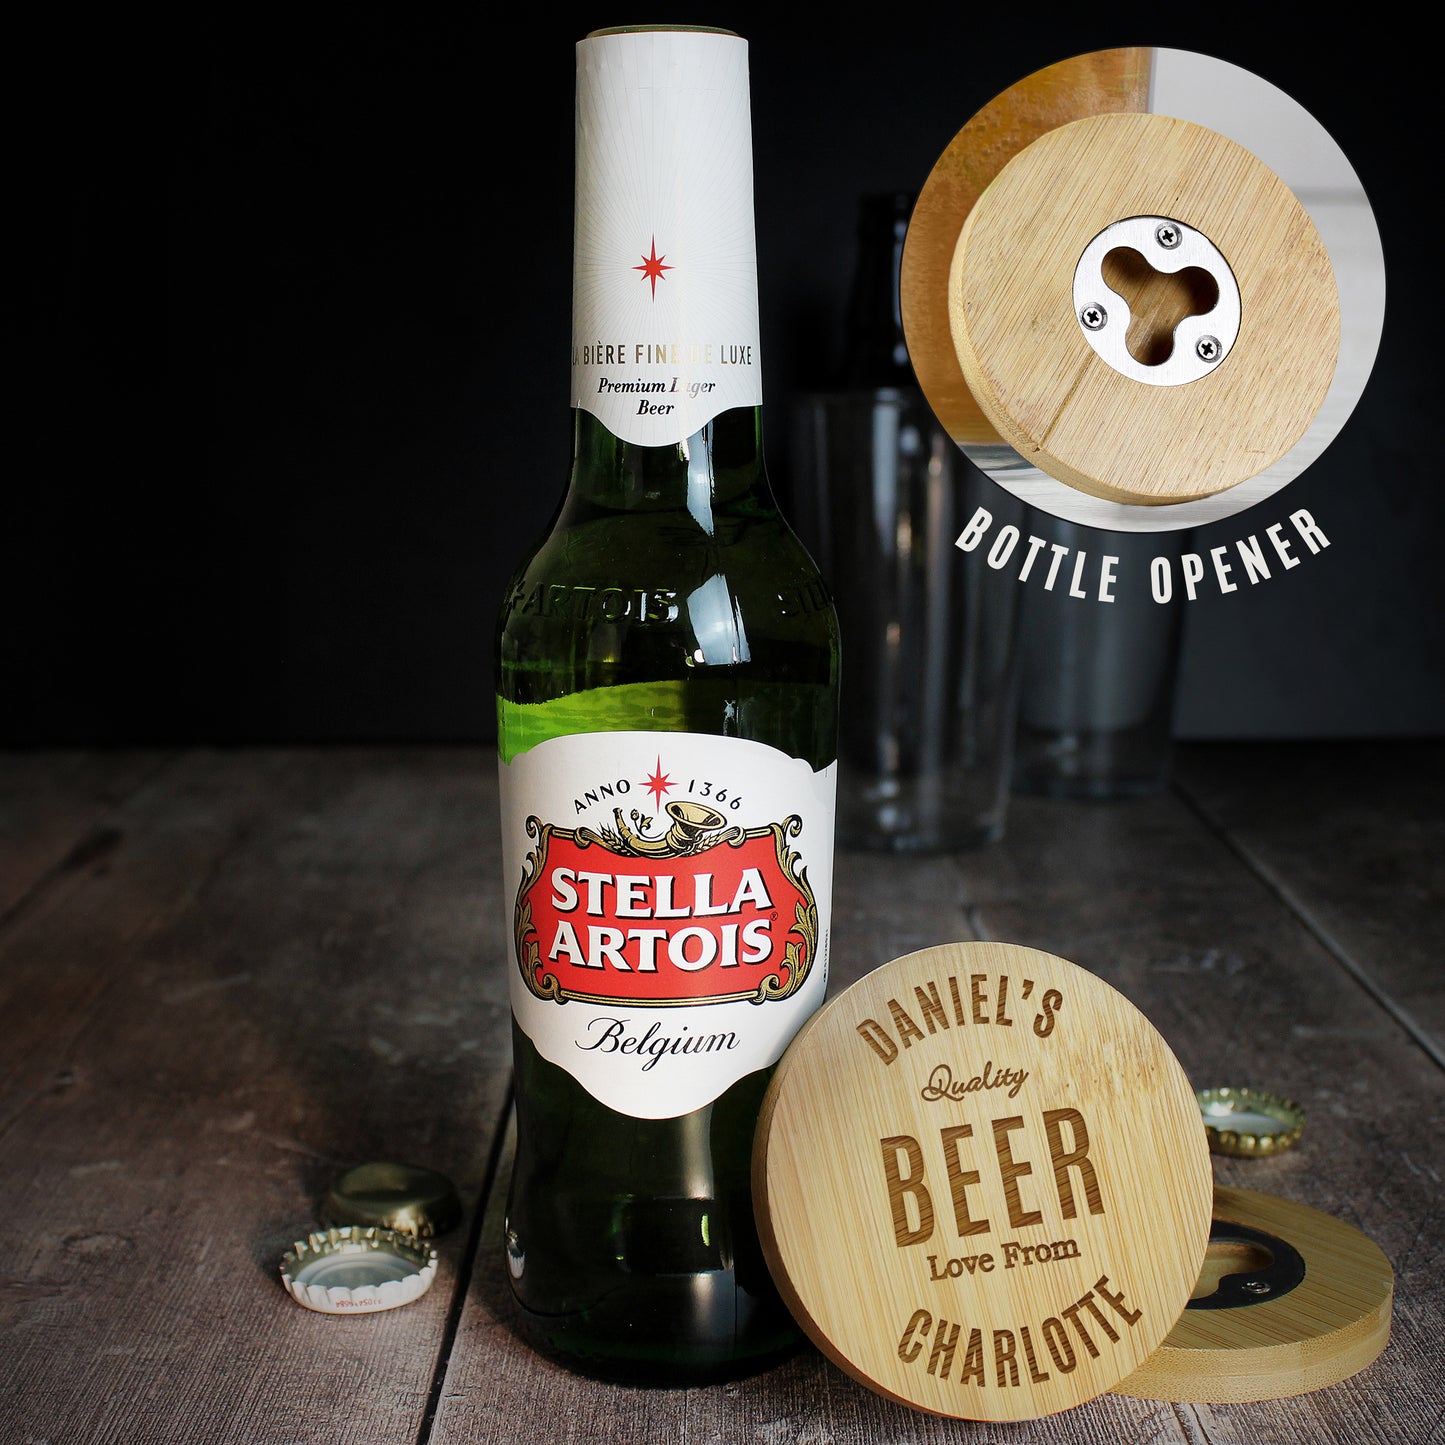 Personalised Bamboo Bottle Opener Coaster and Beer Set - Free Delivery